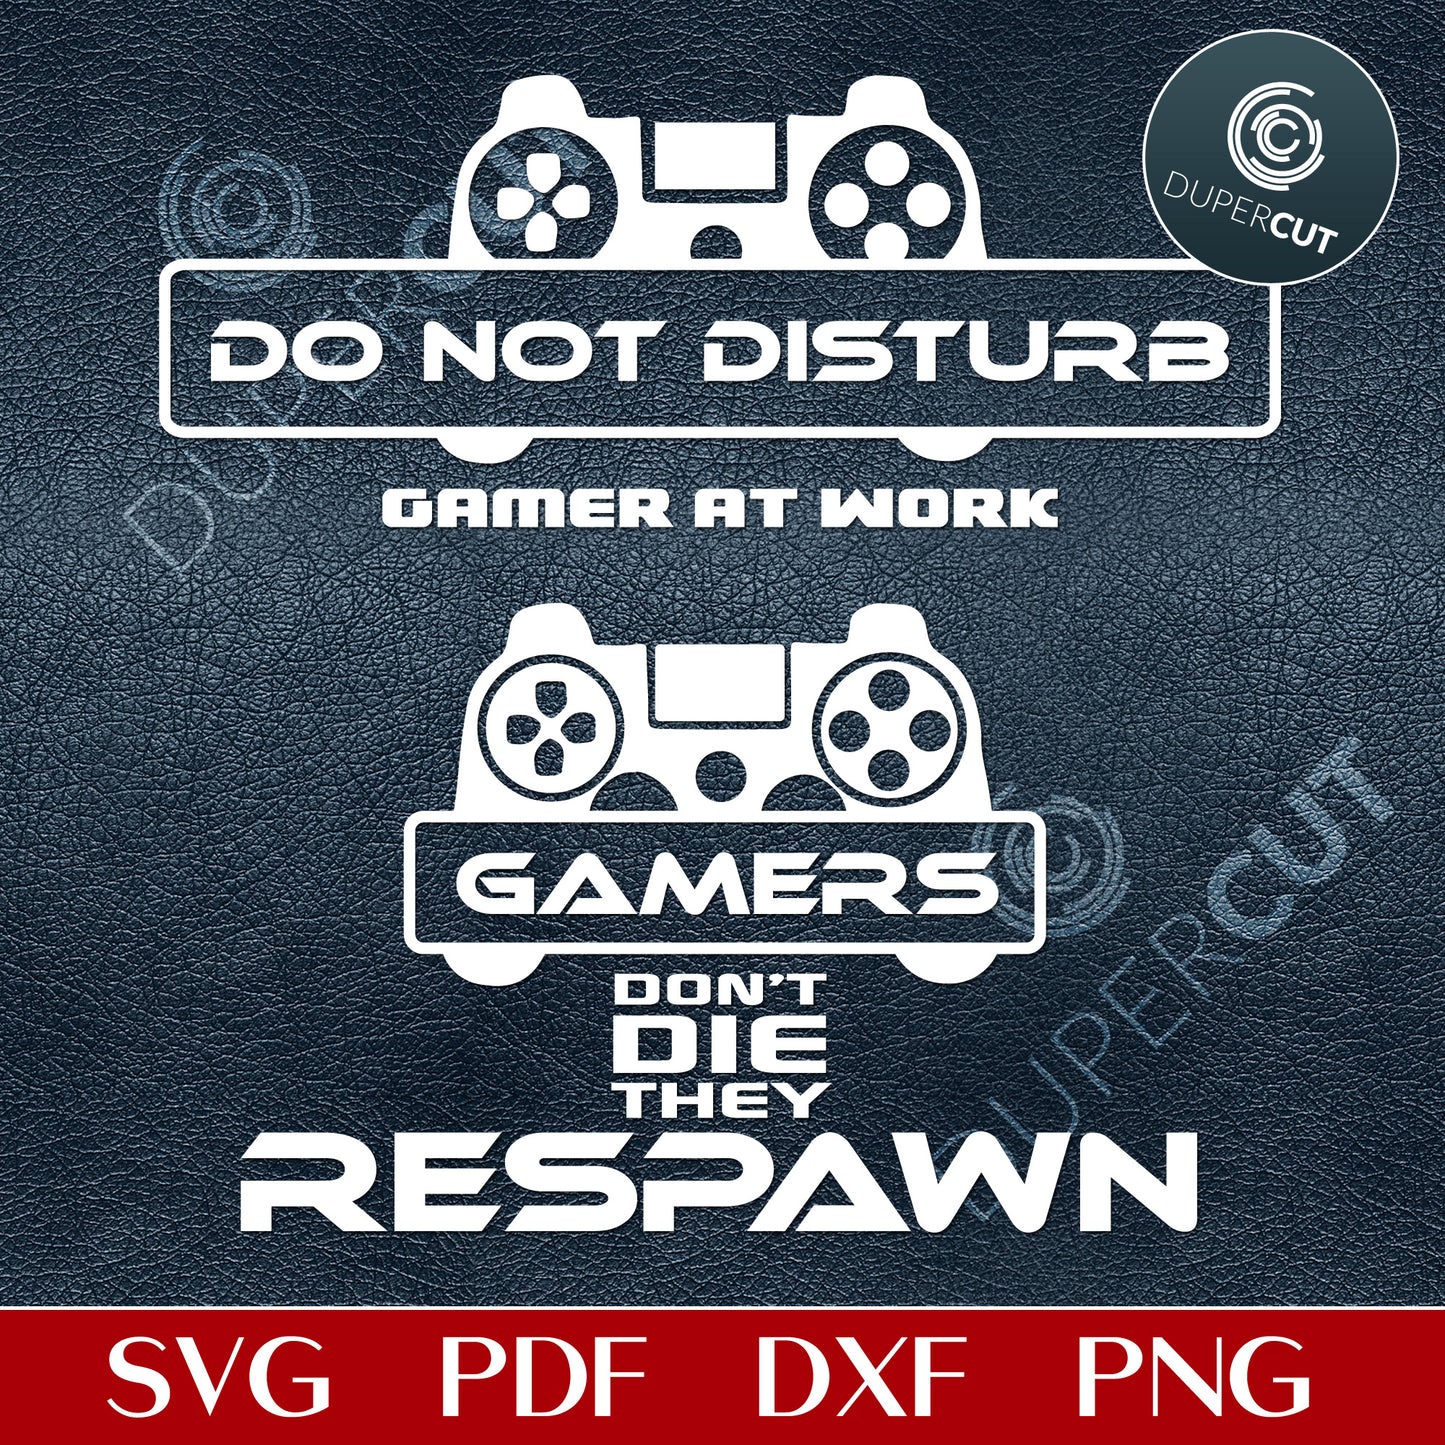 DIY gamer room door sign - SVG DXF JPEG files for CNC machines, laser cutting, Cricut, Silhouette Cameo, Glowforge engraving